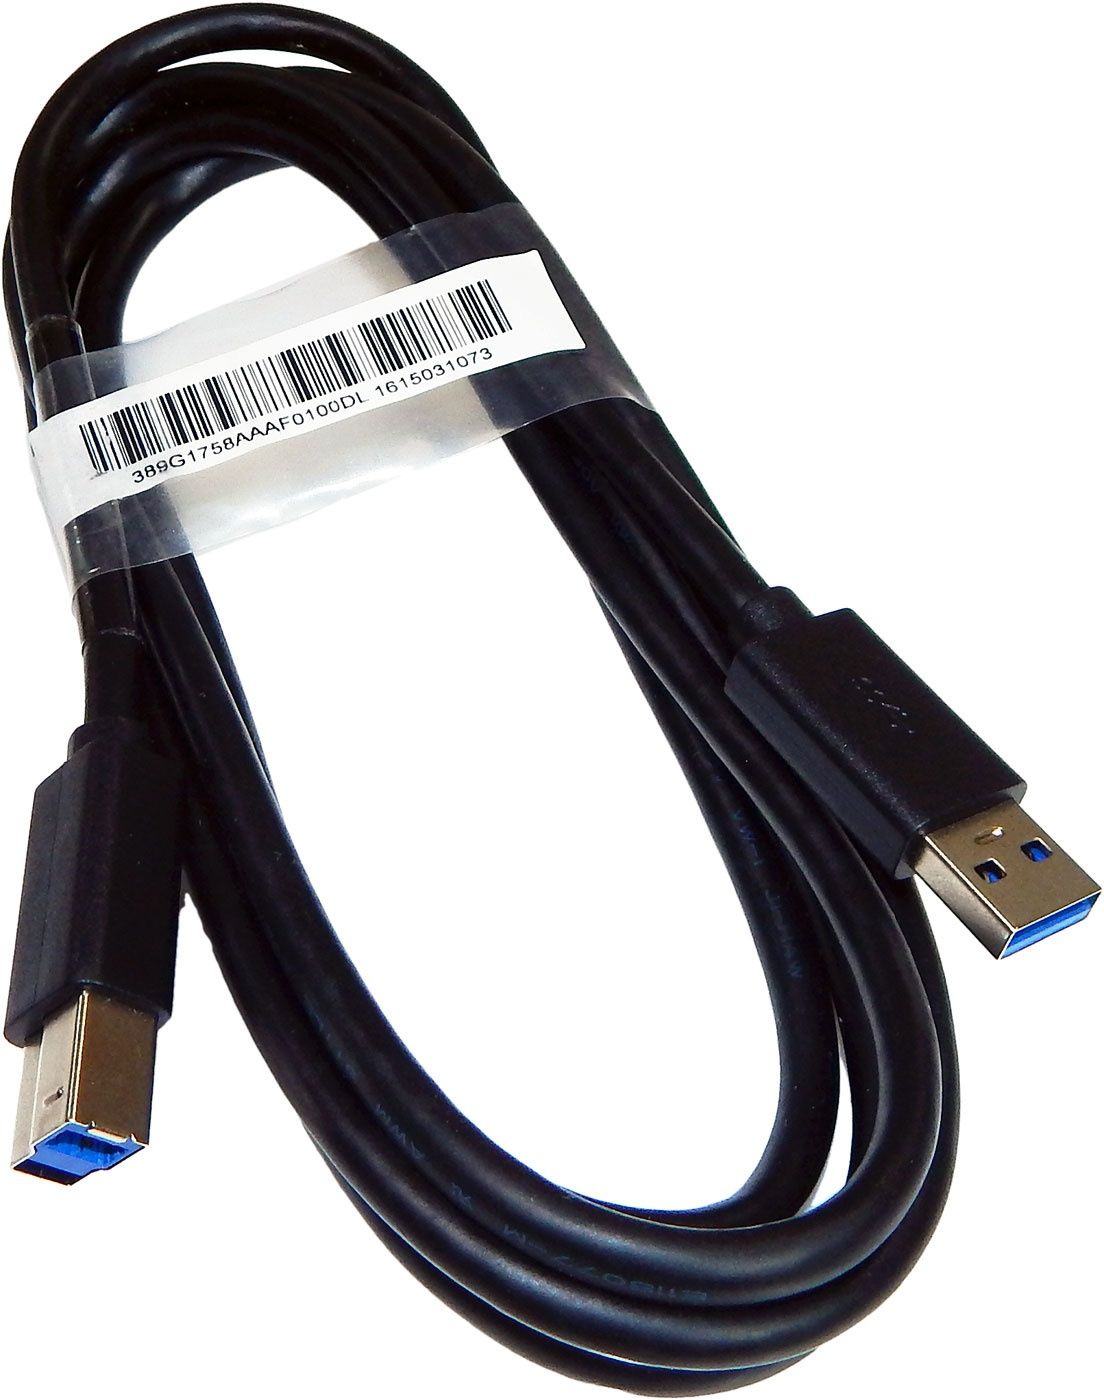 Dell 1.8м USB 3.0 Type A to Type B дата кабель